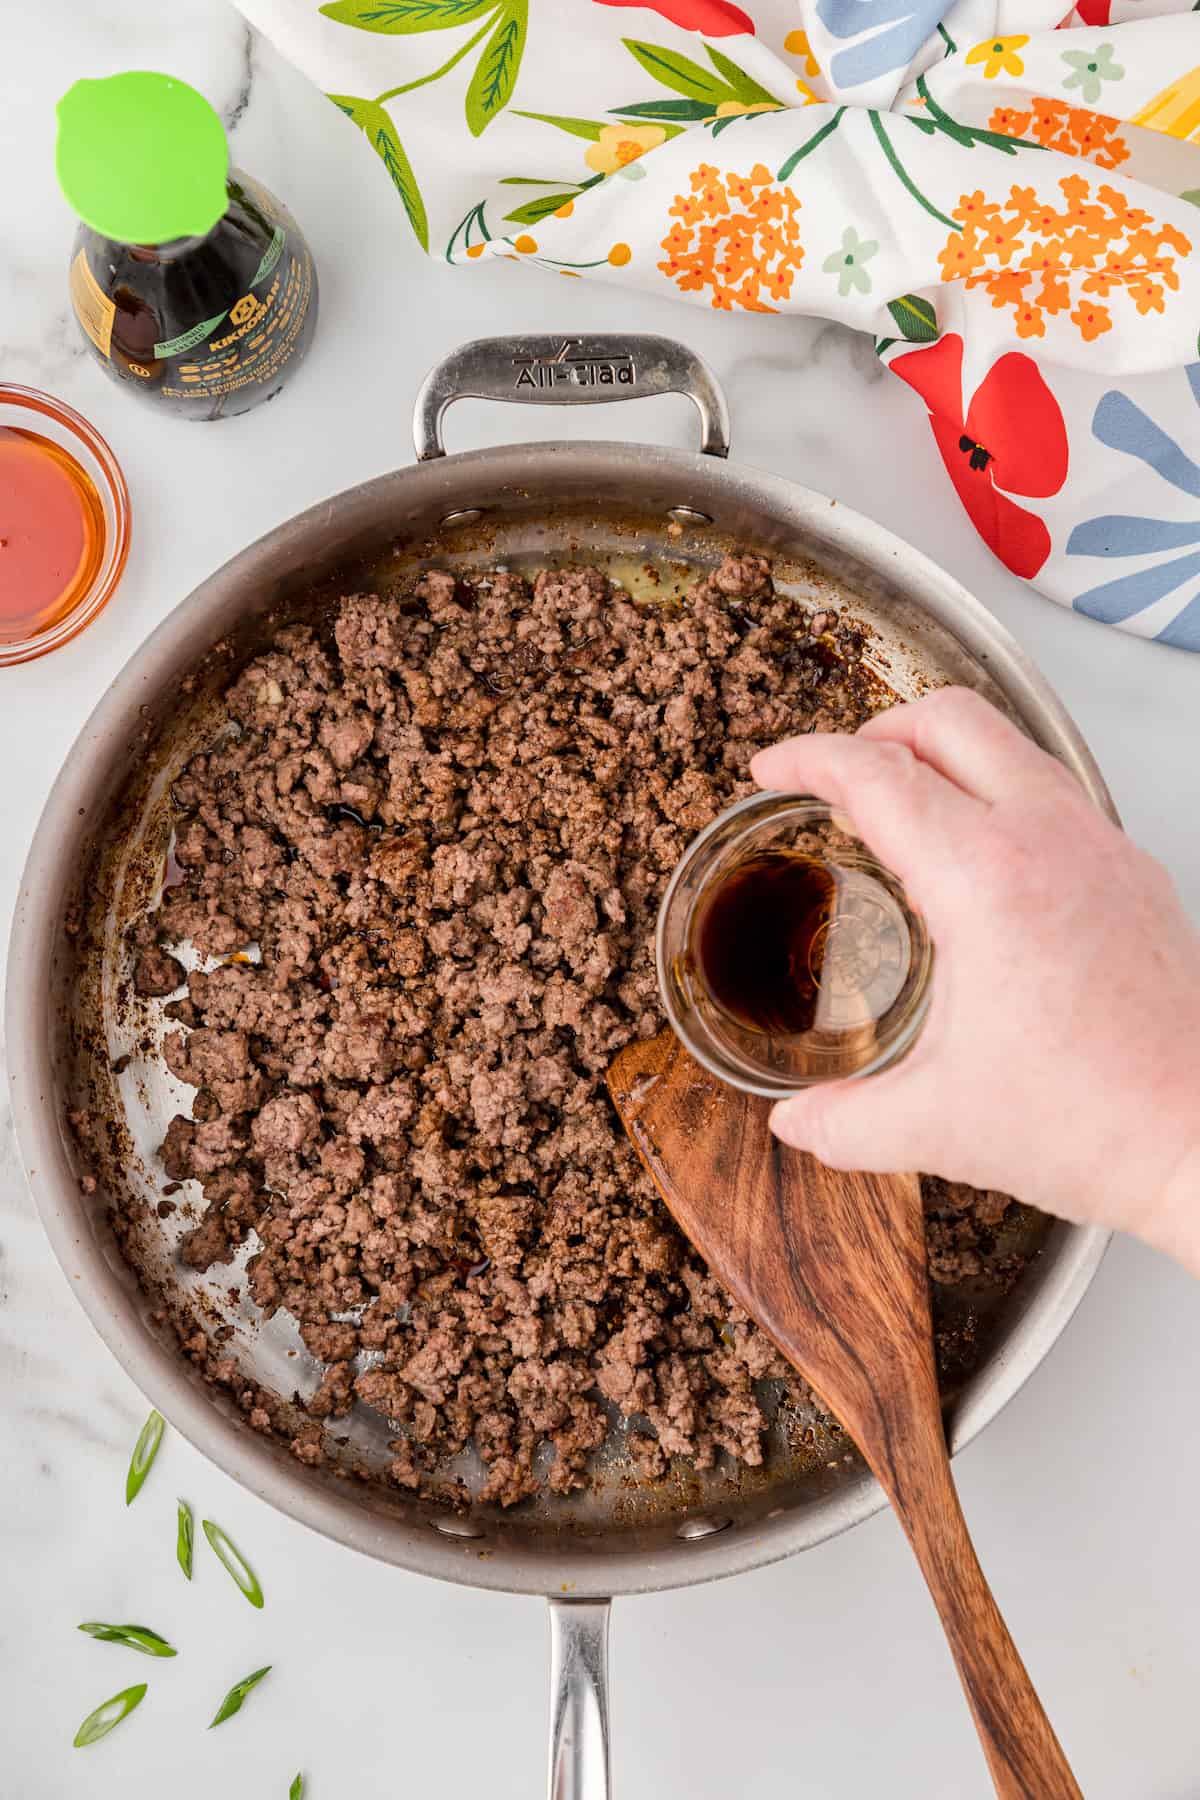 add the soy sauce to the ground beef